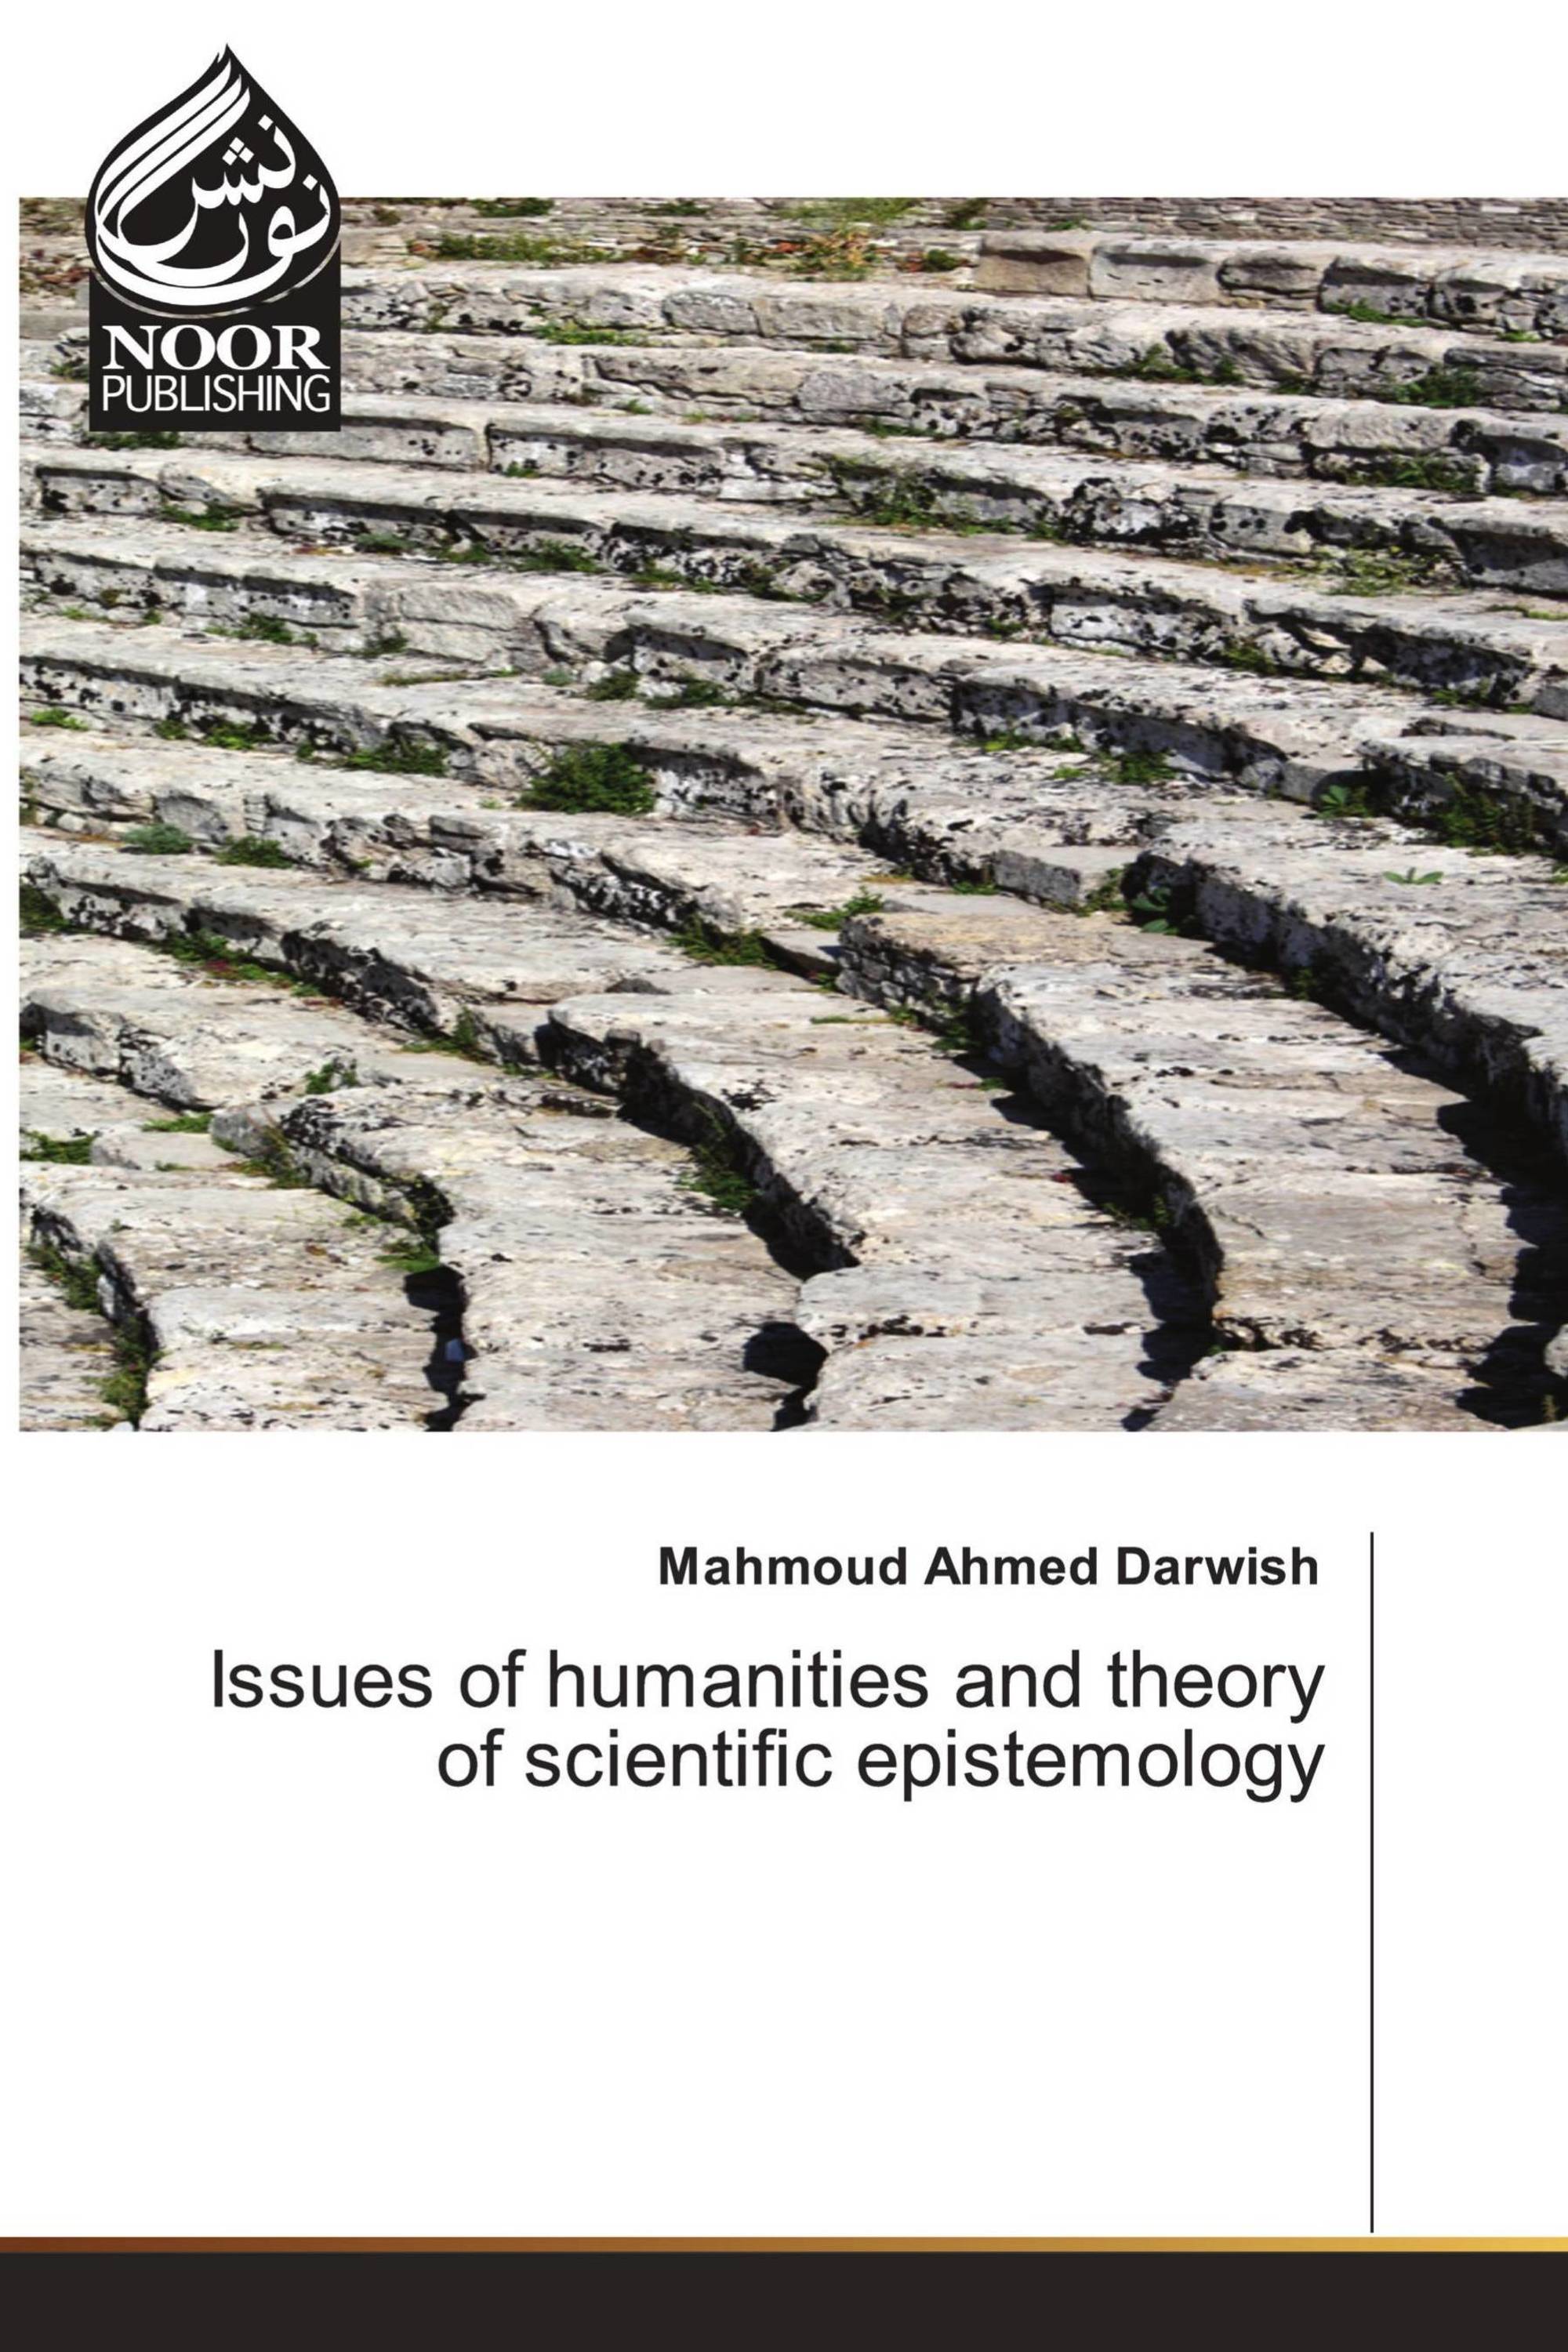 Issues of humanities and theory of scientific epistemology